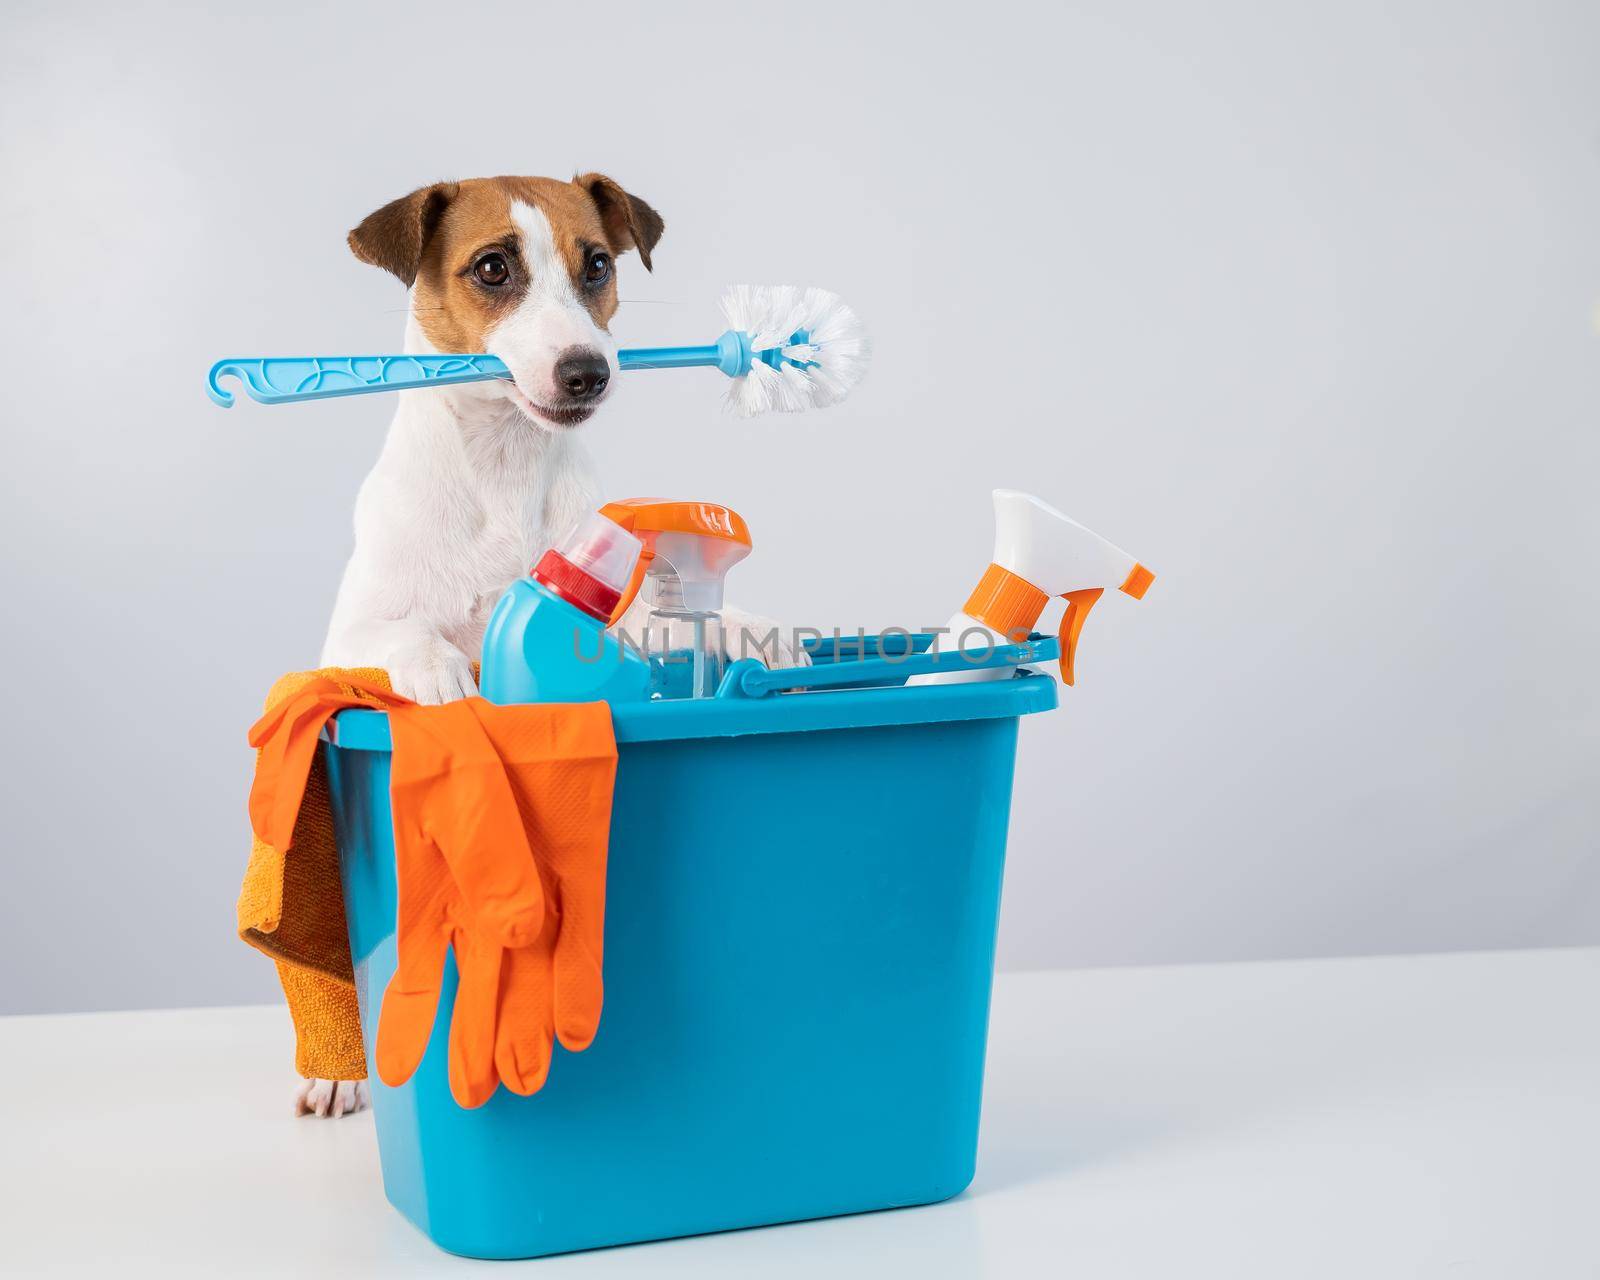 Cleaning products in a bucket and a dog holding a toilet brush on a white background